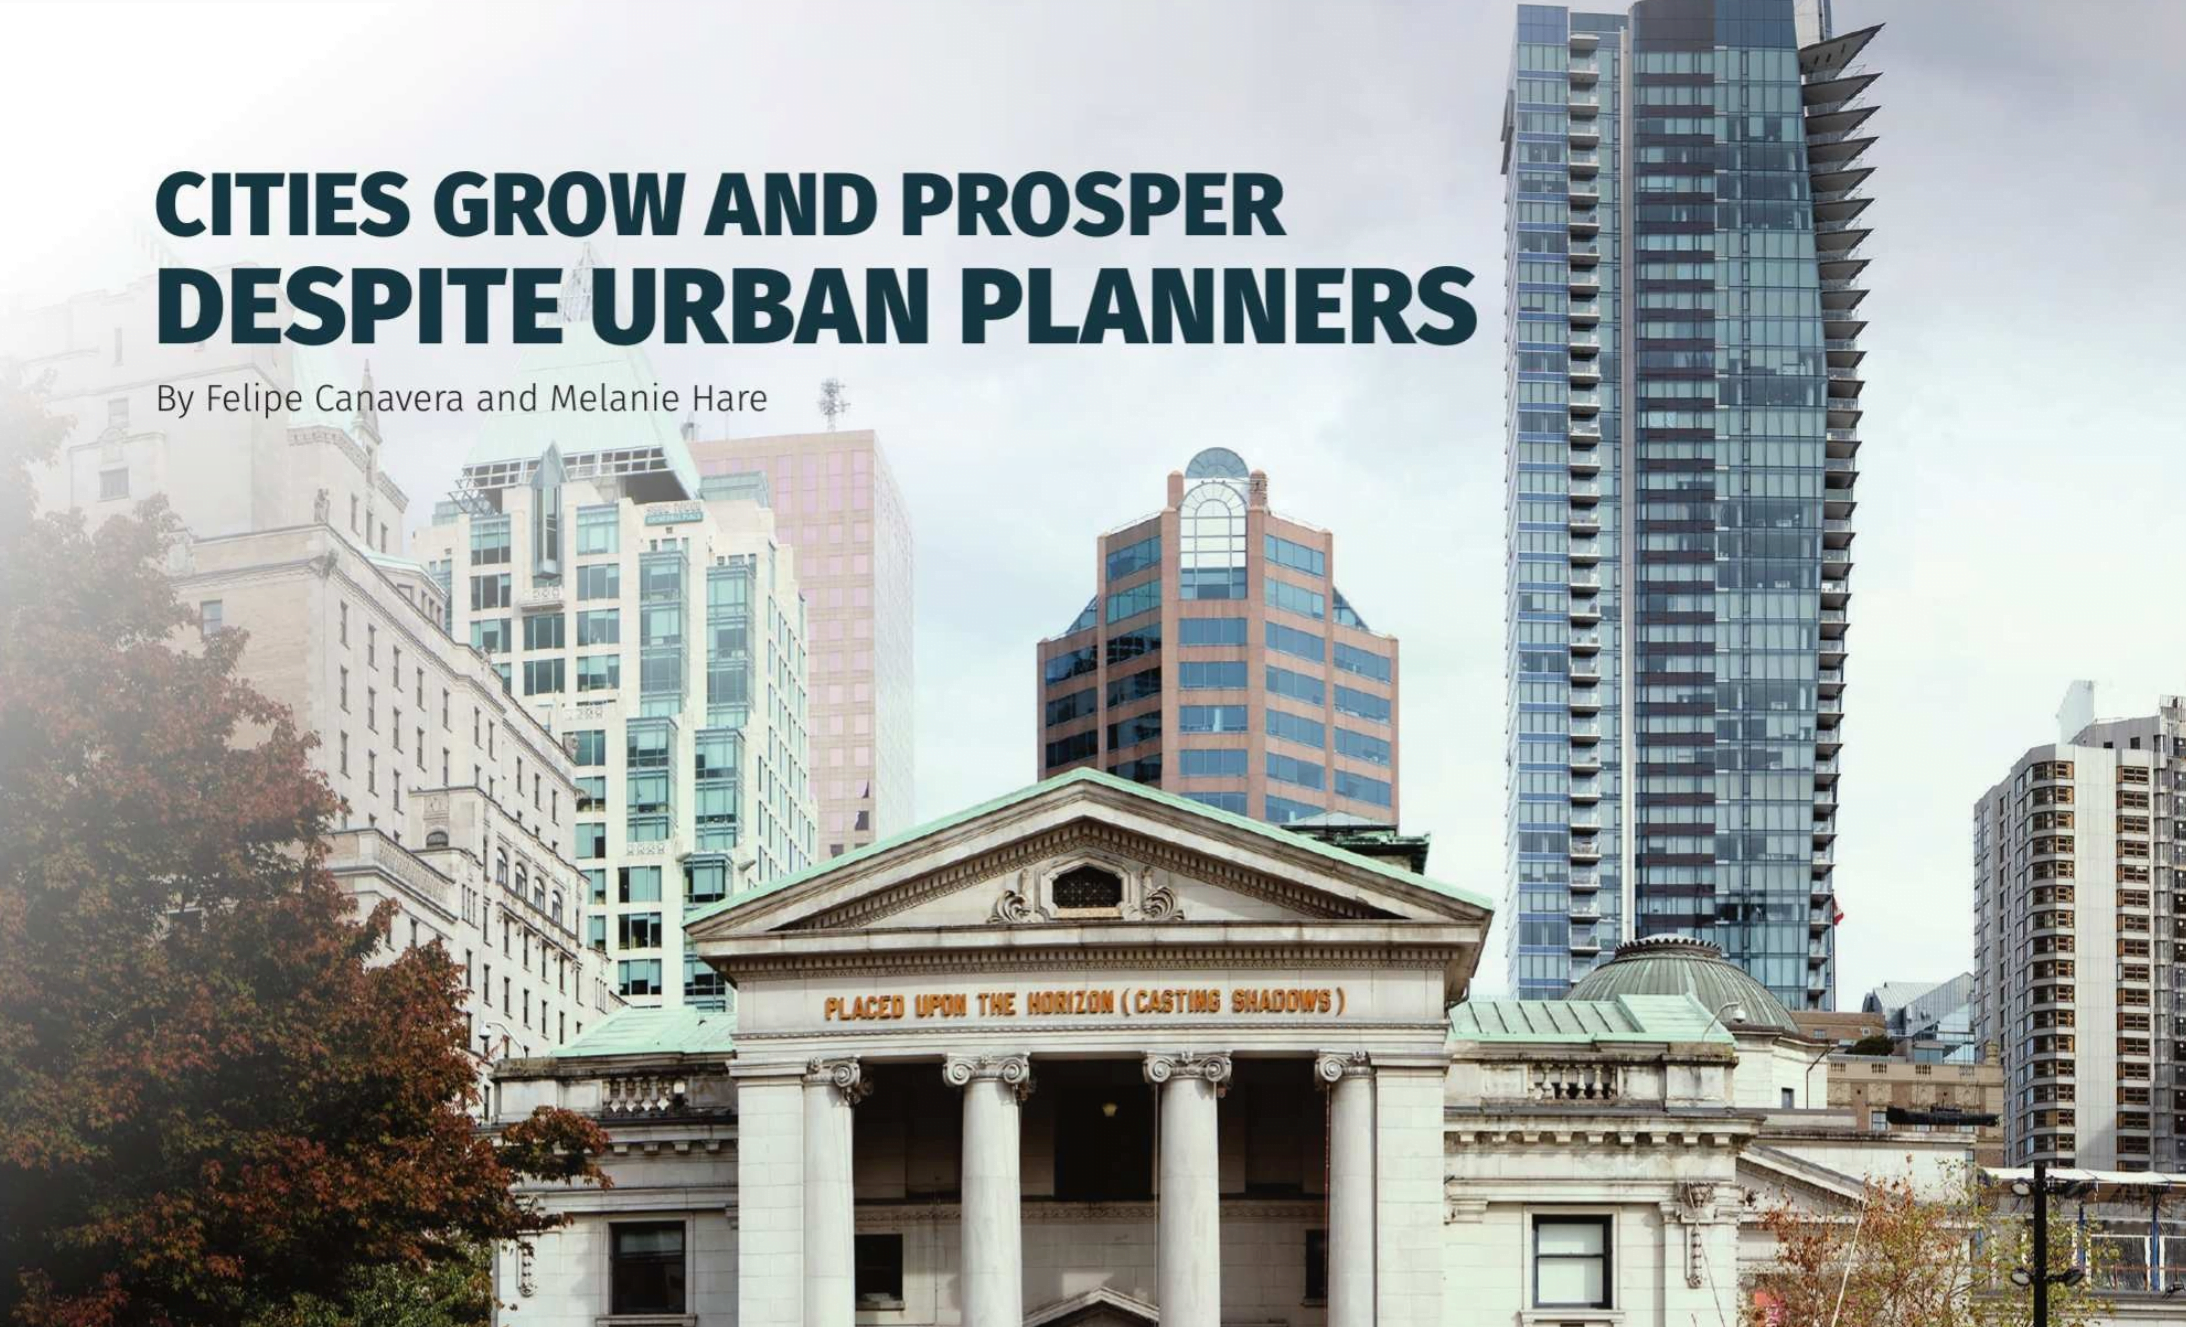 Photograph for PLAN Canada's Cities Grow and Prosper Despite Urban Planners.